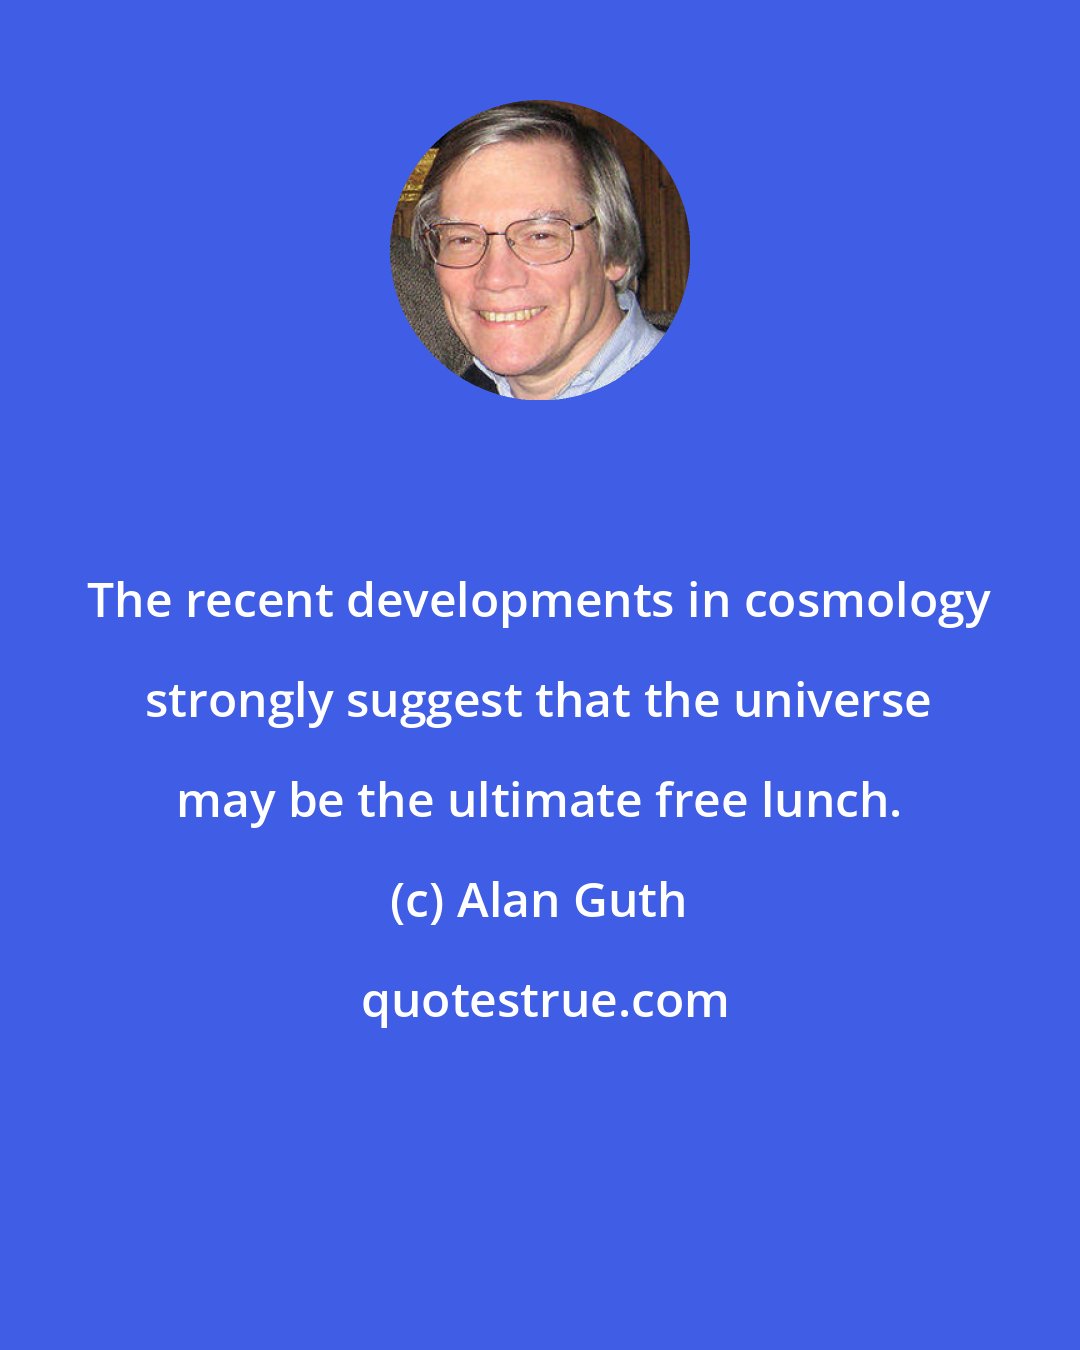 Alan Guth: The recent developments in cosmology strongly suggest that the universe may be the ultimate free lunch.